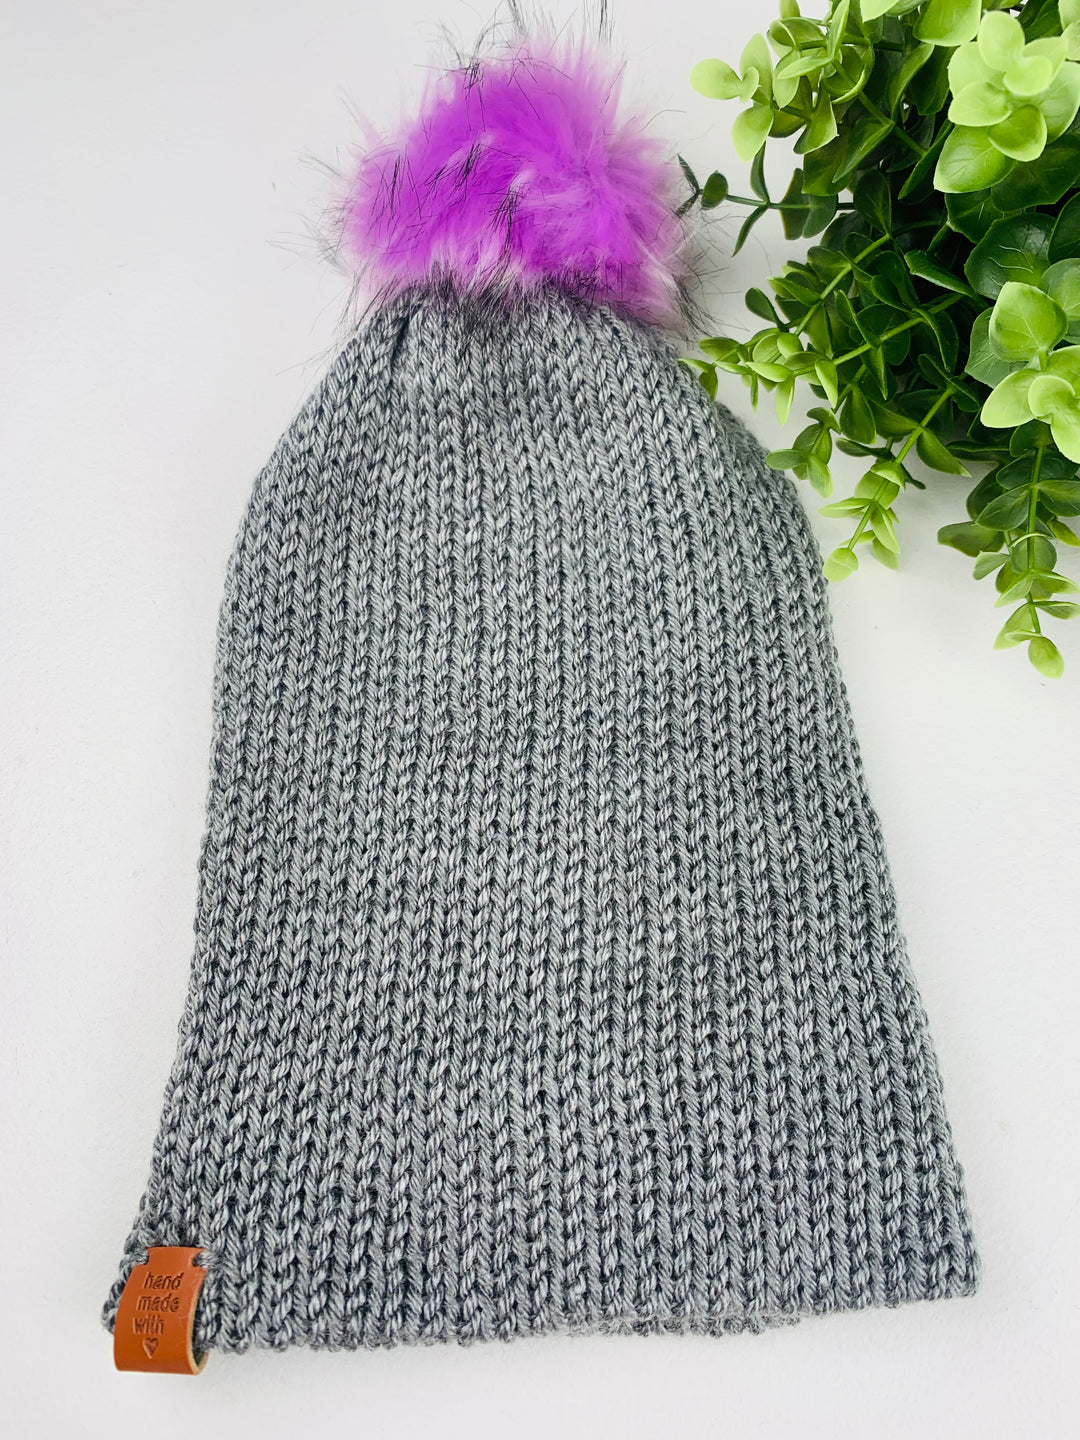 Knit Owl, Teen/Adult Knitted Hats